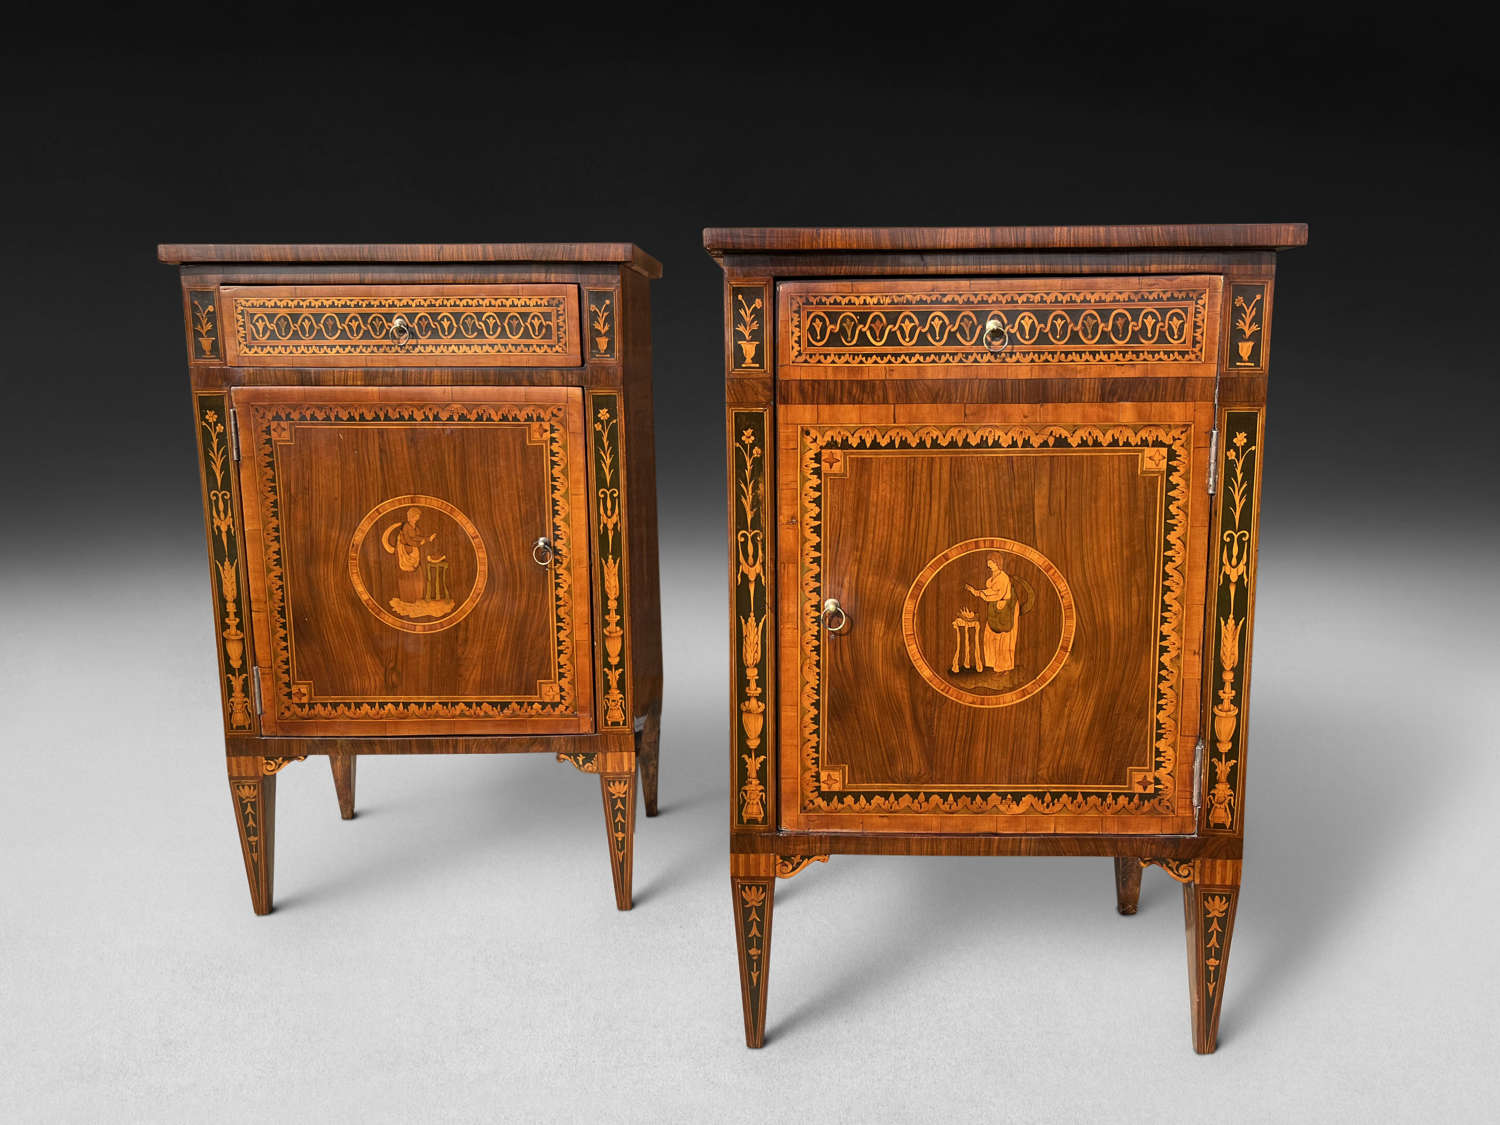 A PAIR OF COMMODINI IN THE MANNER OF MAGALIONI ITALY C 1780